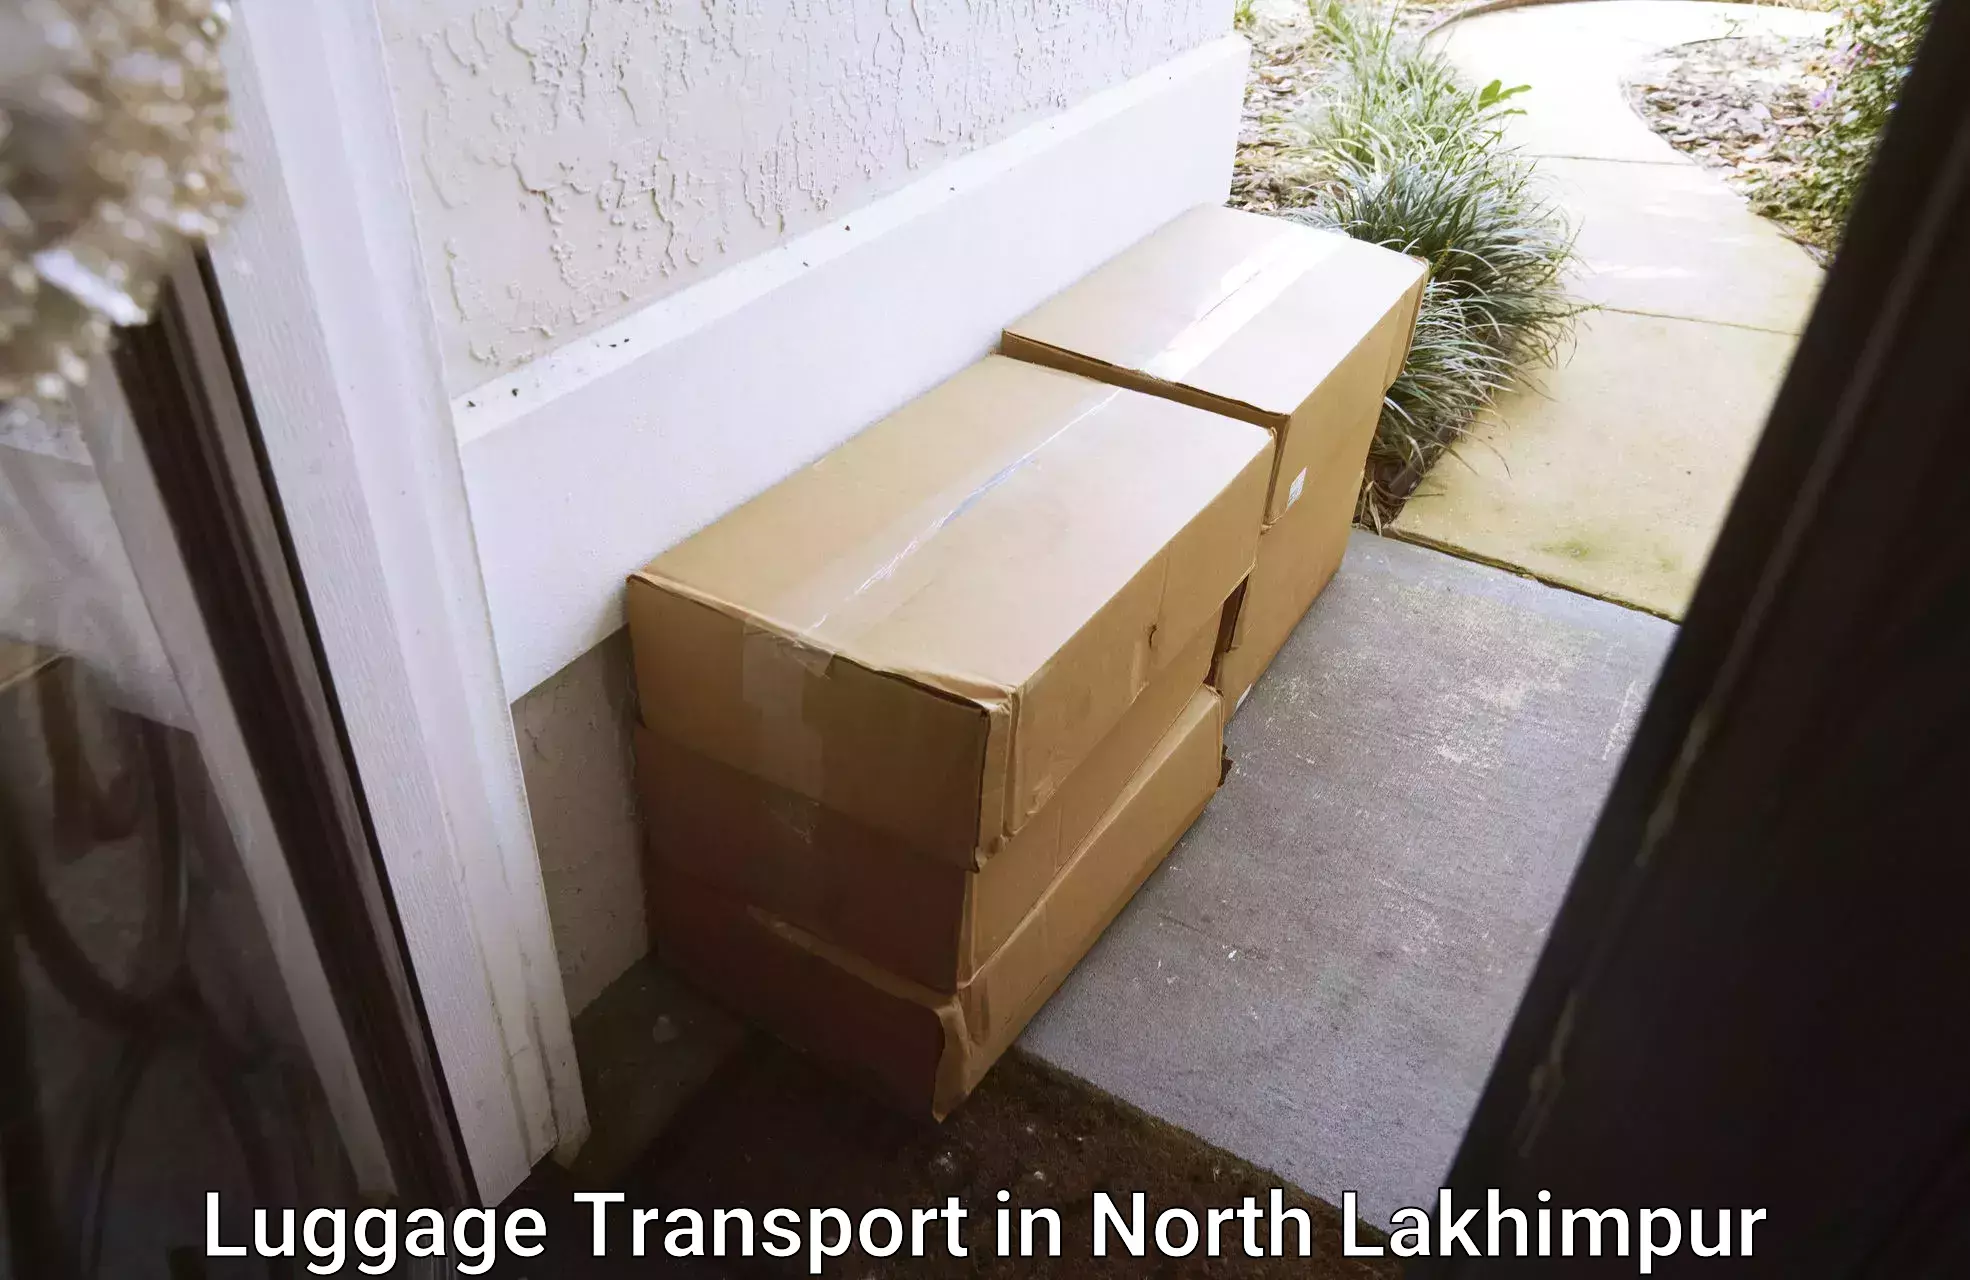 Luggage shipment specialists in North Lakhimpur